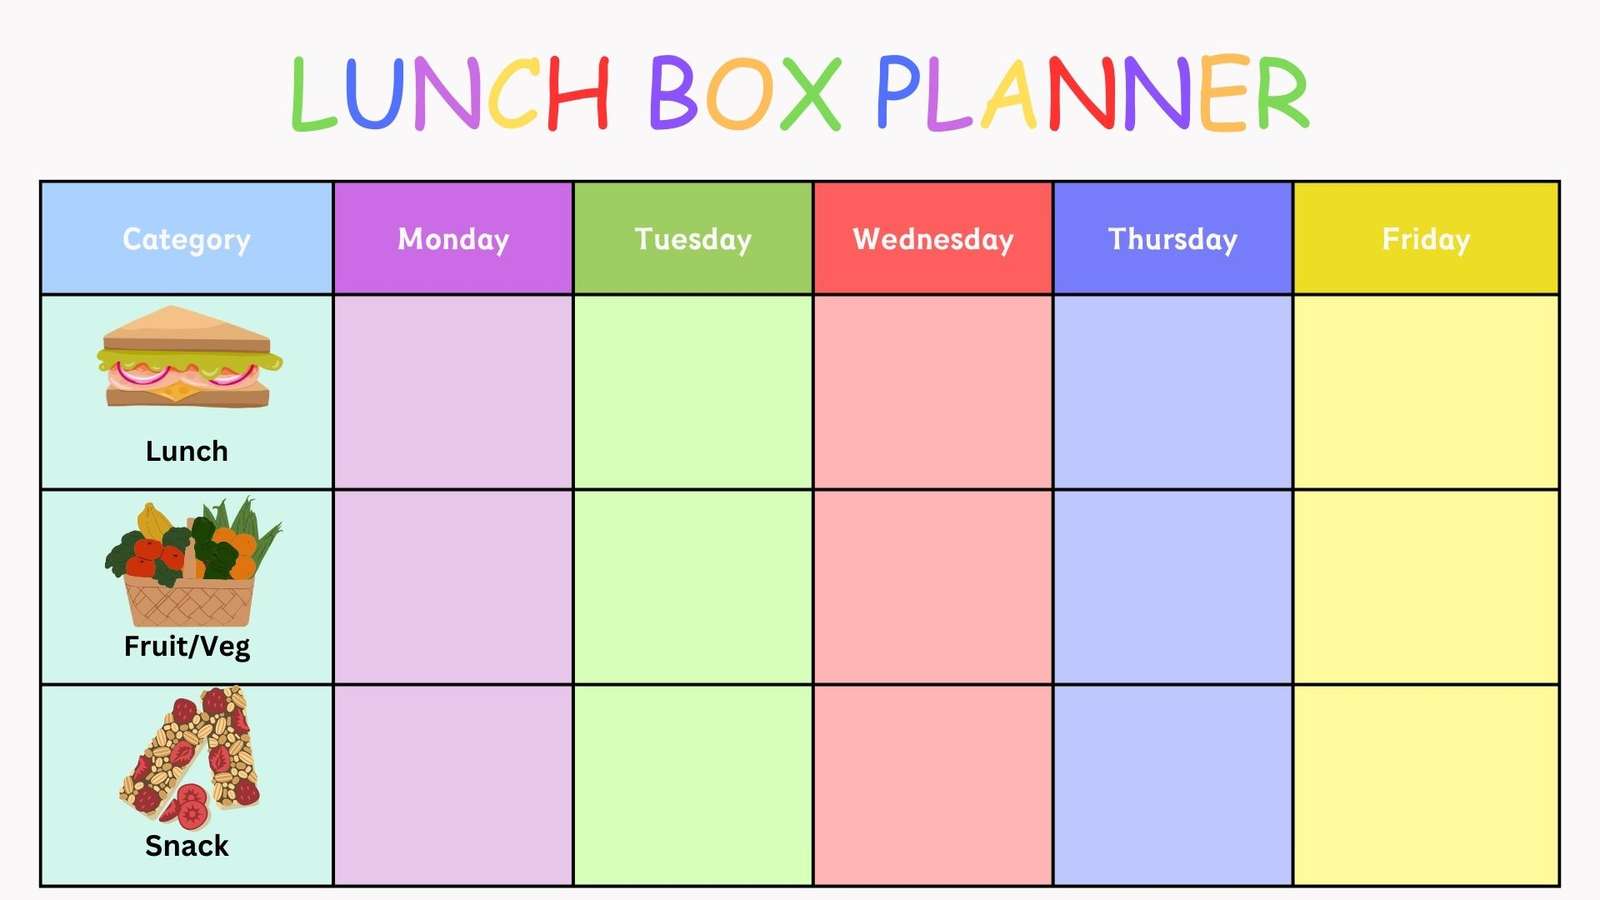 Lunch box planner online puzzle